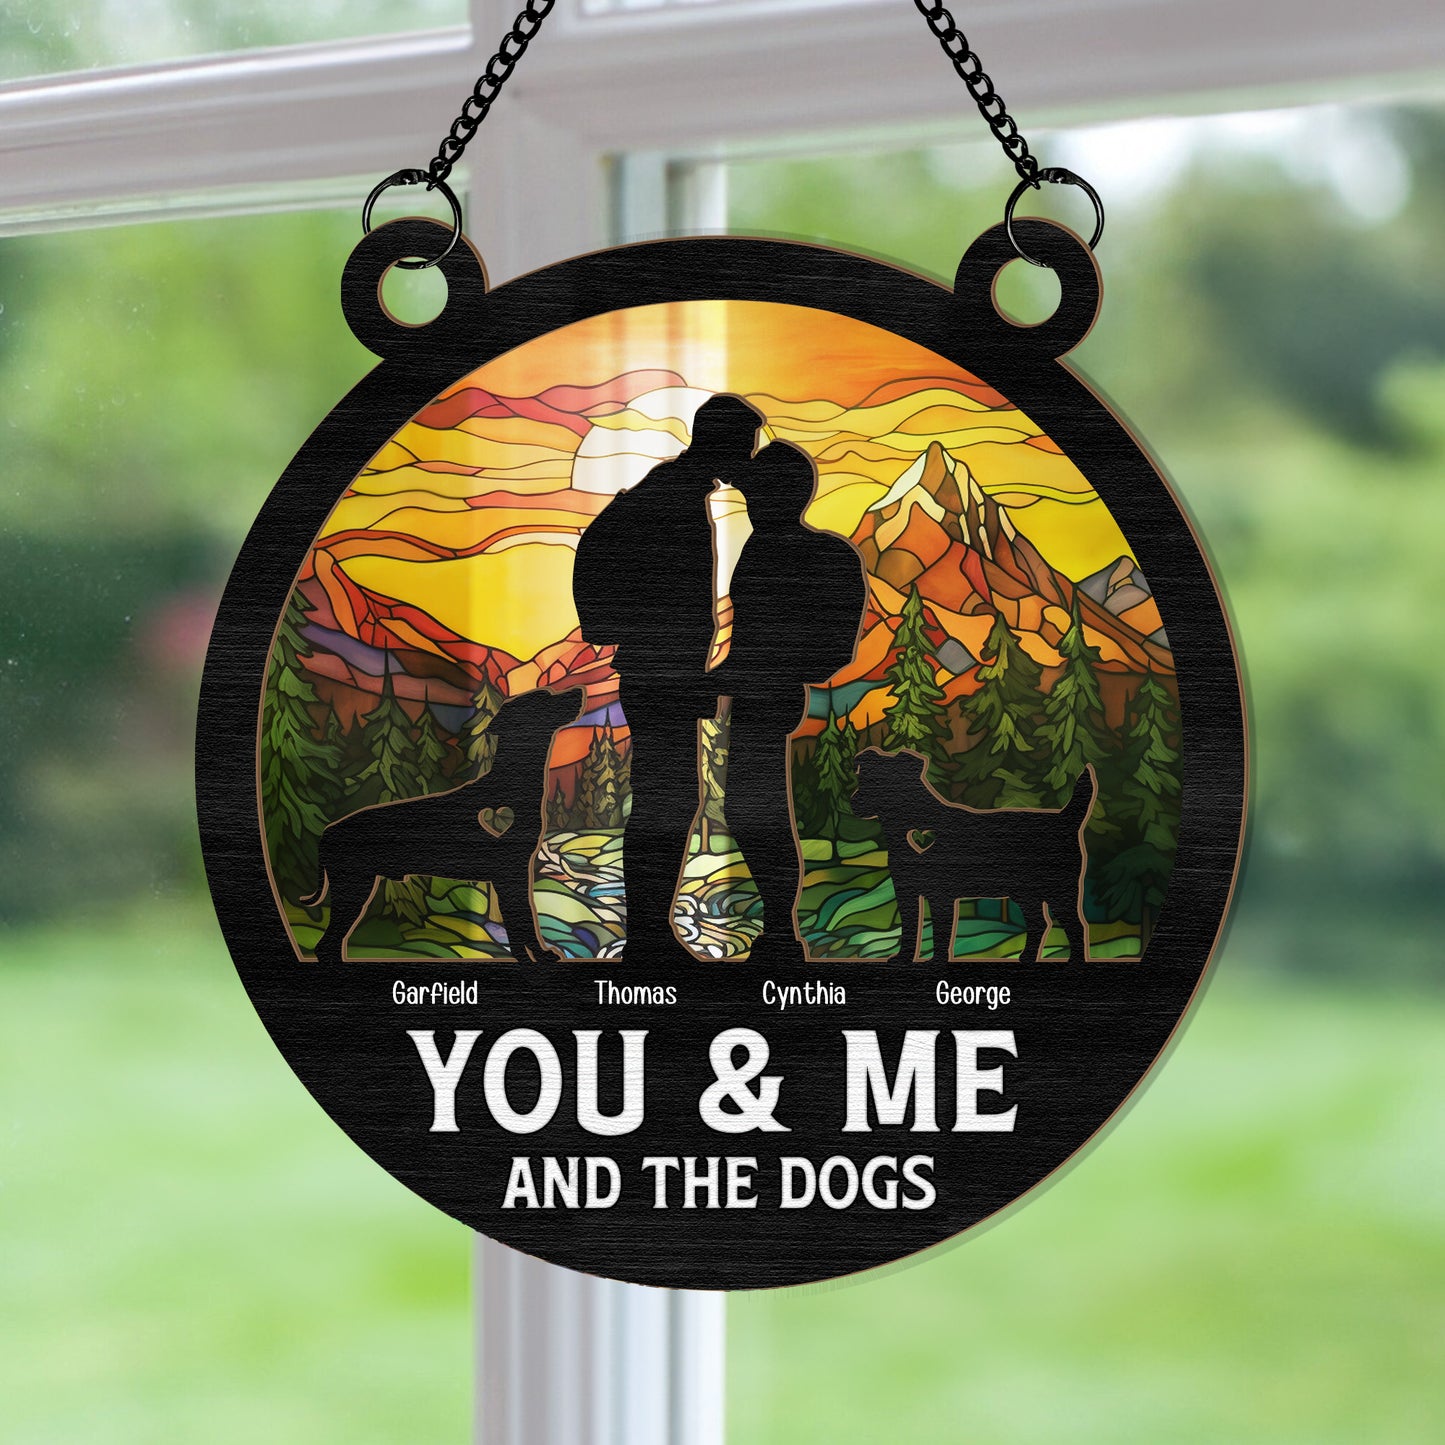 You & Me And The Dog - Personalized Window Hanging Suncatcher Ornament